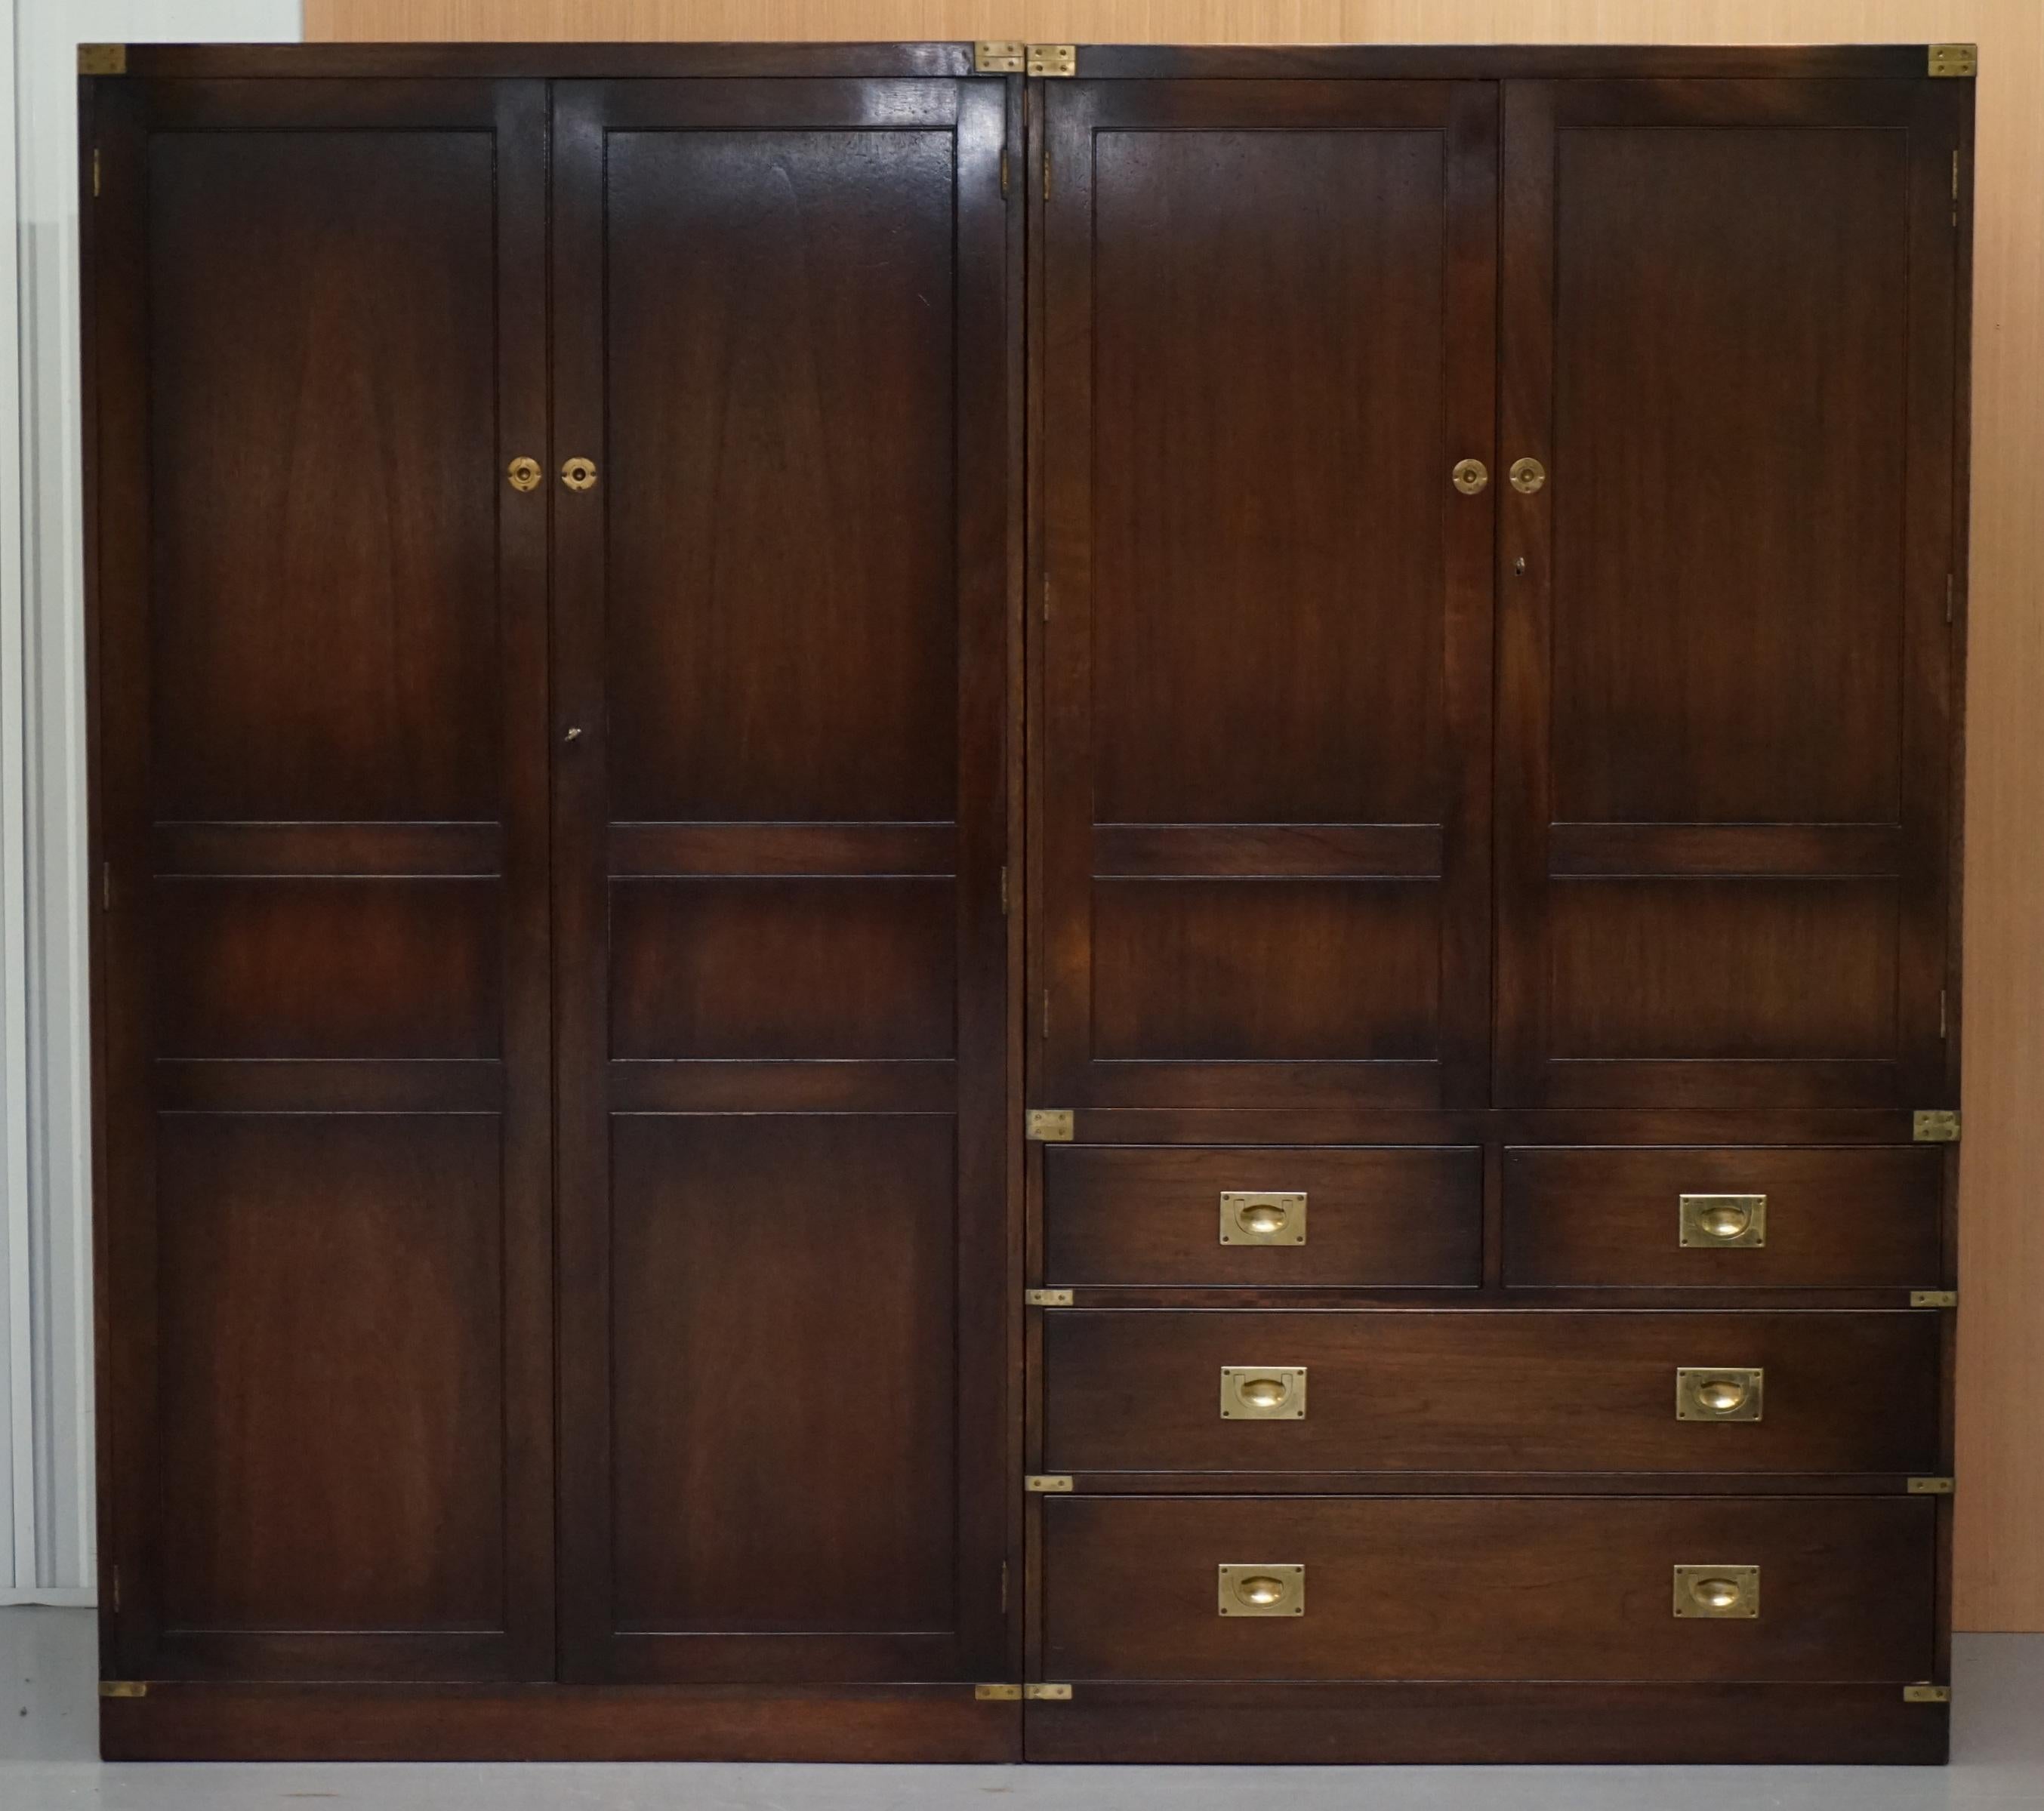 We are delighted to offer for sale one of two stunning Bevan Funell military campaign mahogany wardrobes RRP £7999 each

This auction is for the wardrobe without the drawers, the other piece is not included in this auction but listed under my